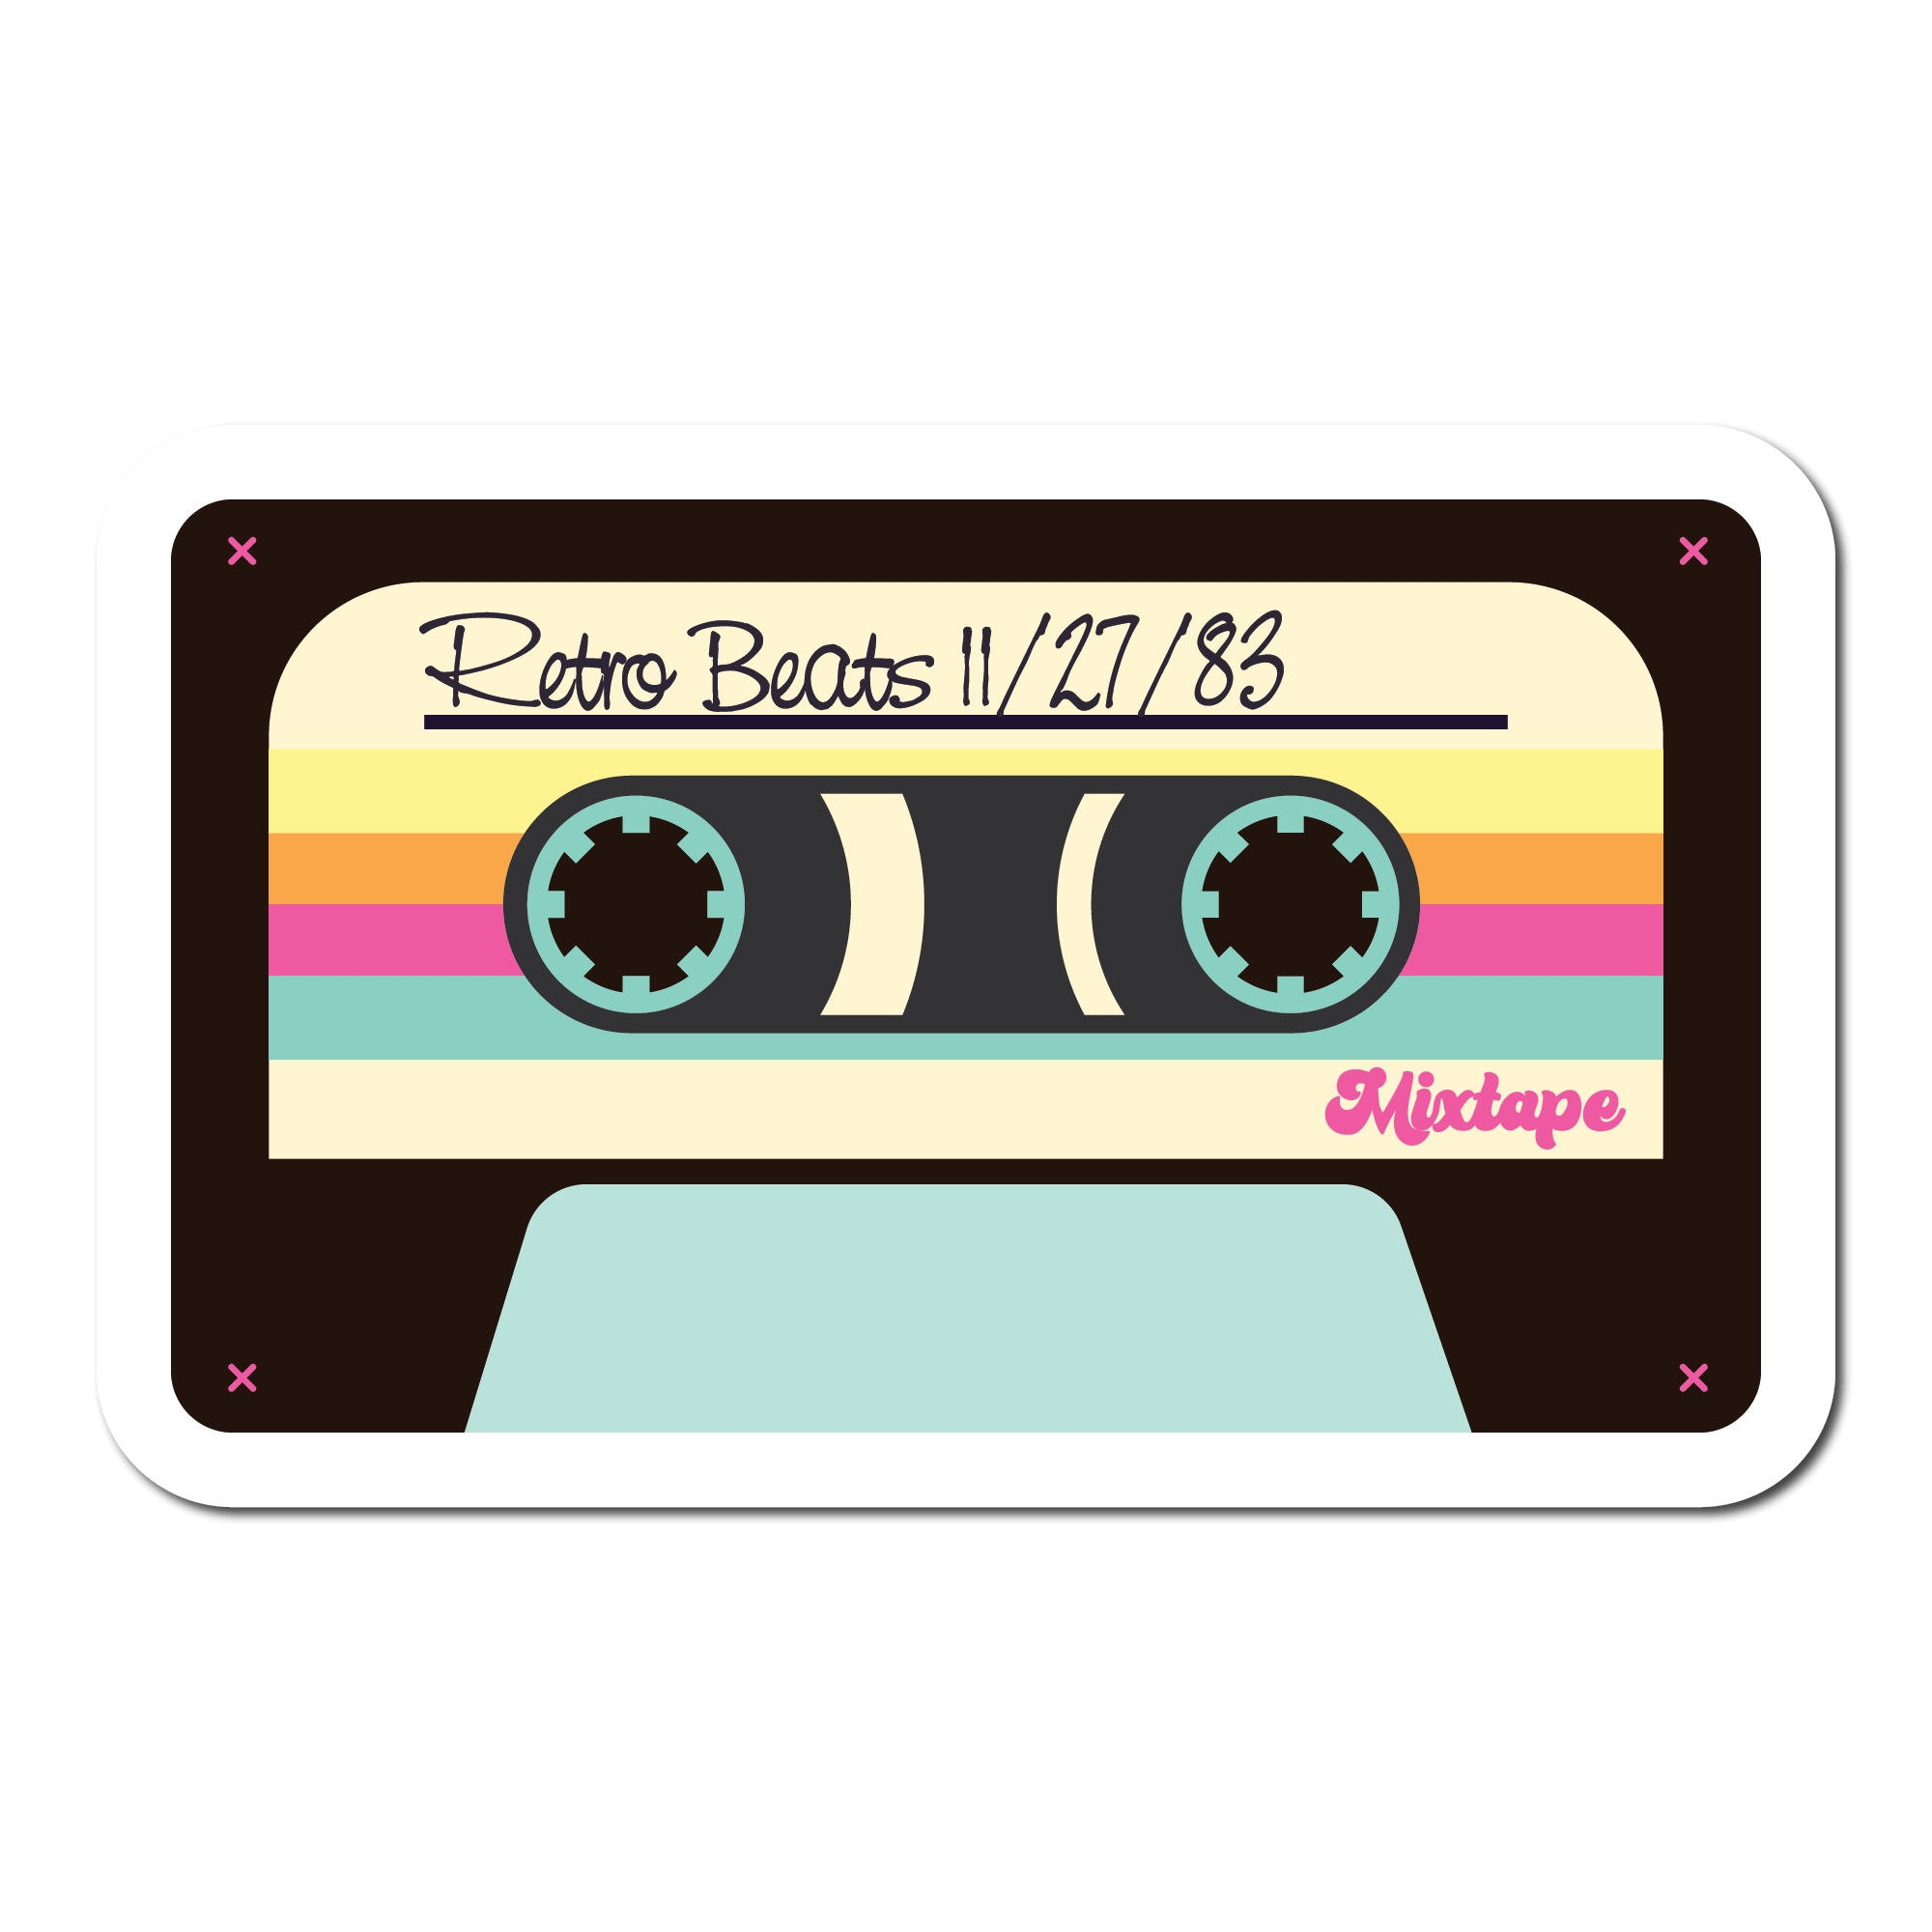 Small Sticker of a cassette that says retro beats 11/27/83